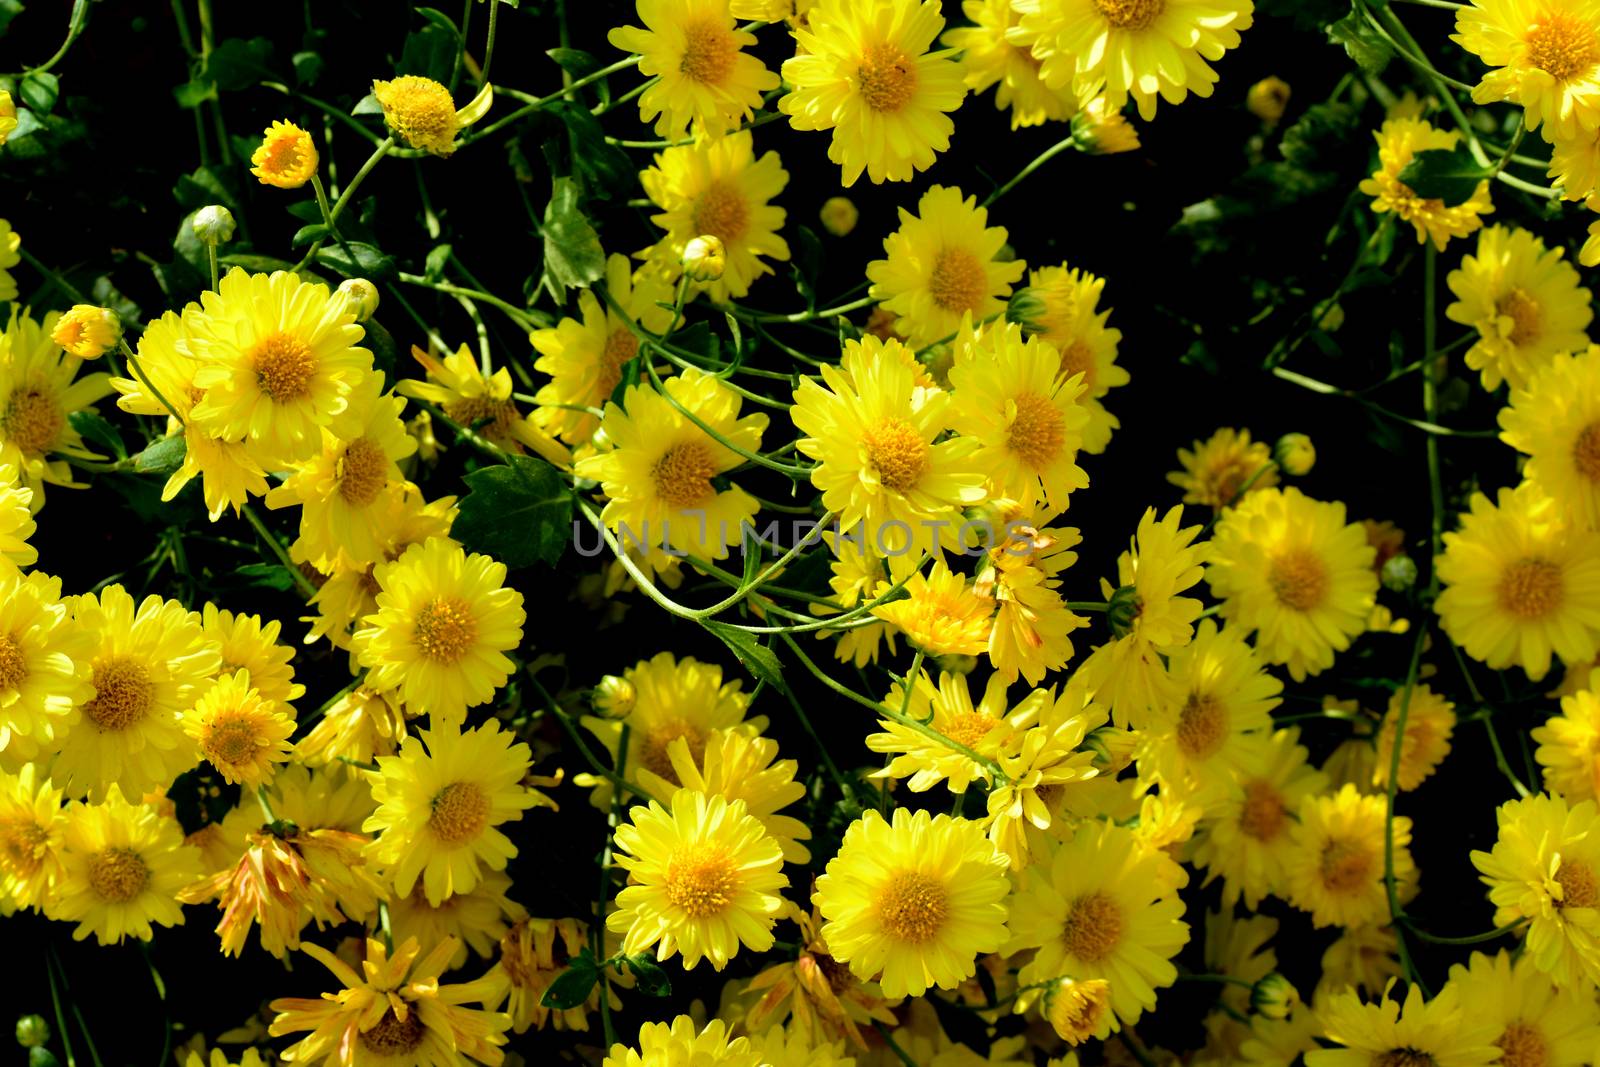 Chrysanthemum morifolium Ramat is a perennial herb covered with yellow villous hairs by ideation90